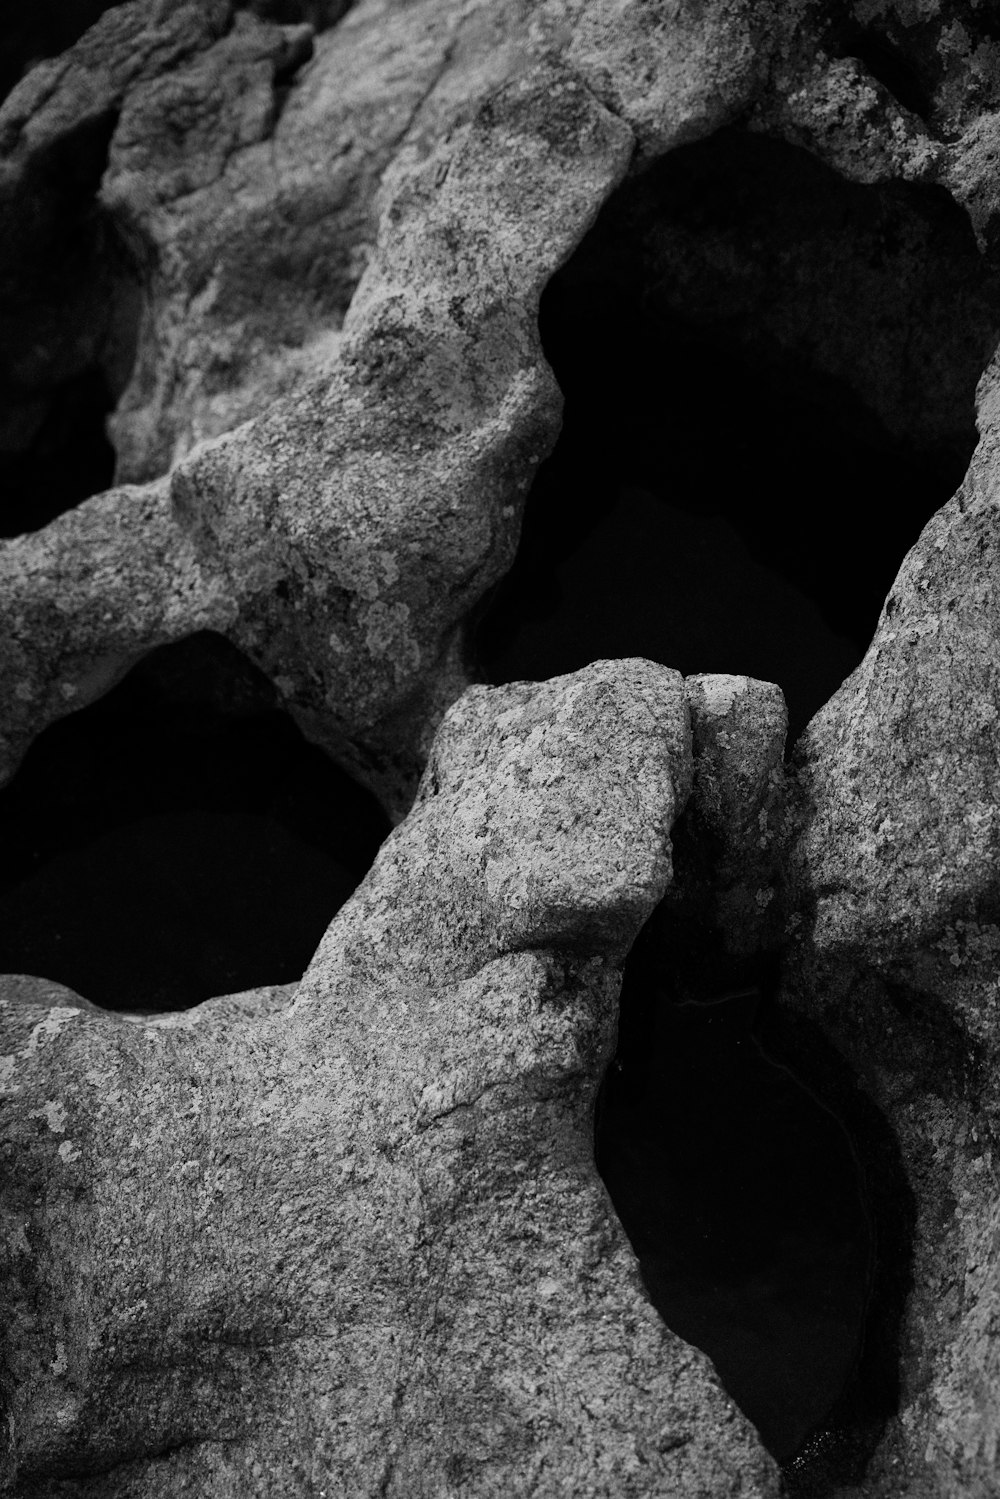 a black and white photo of rocks with holes in them